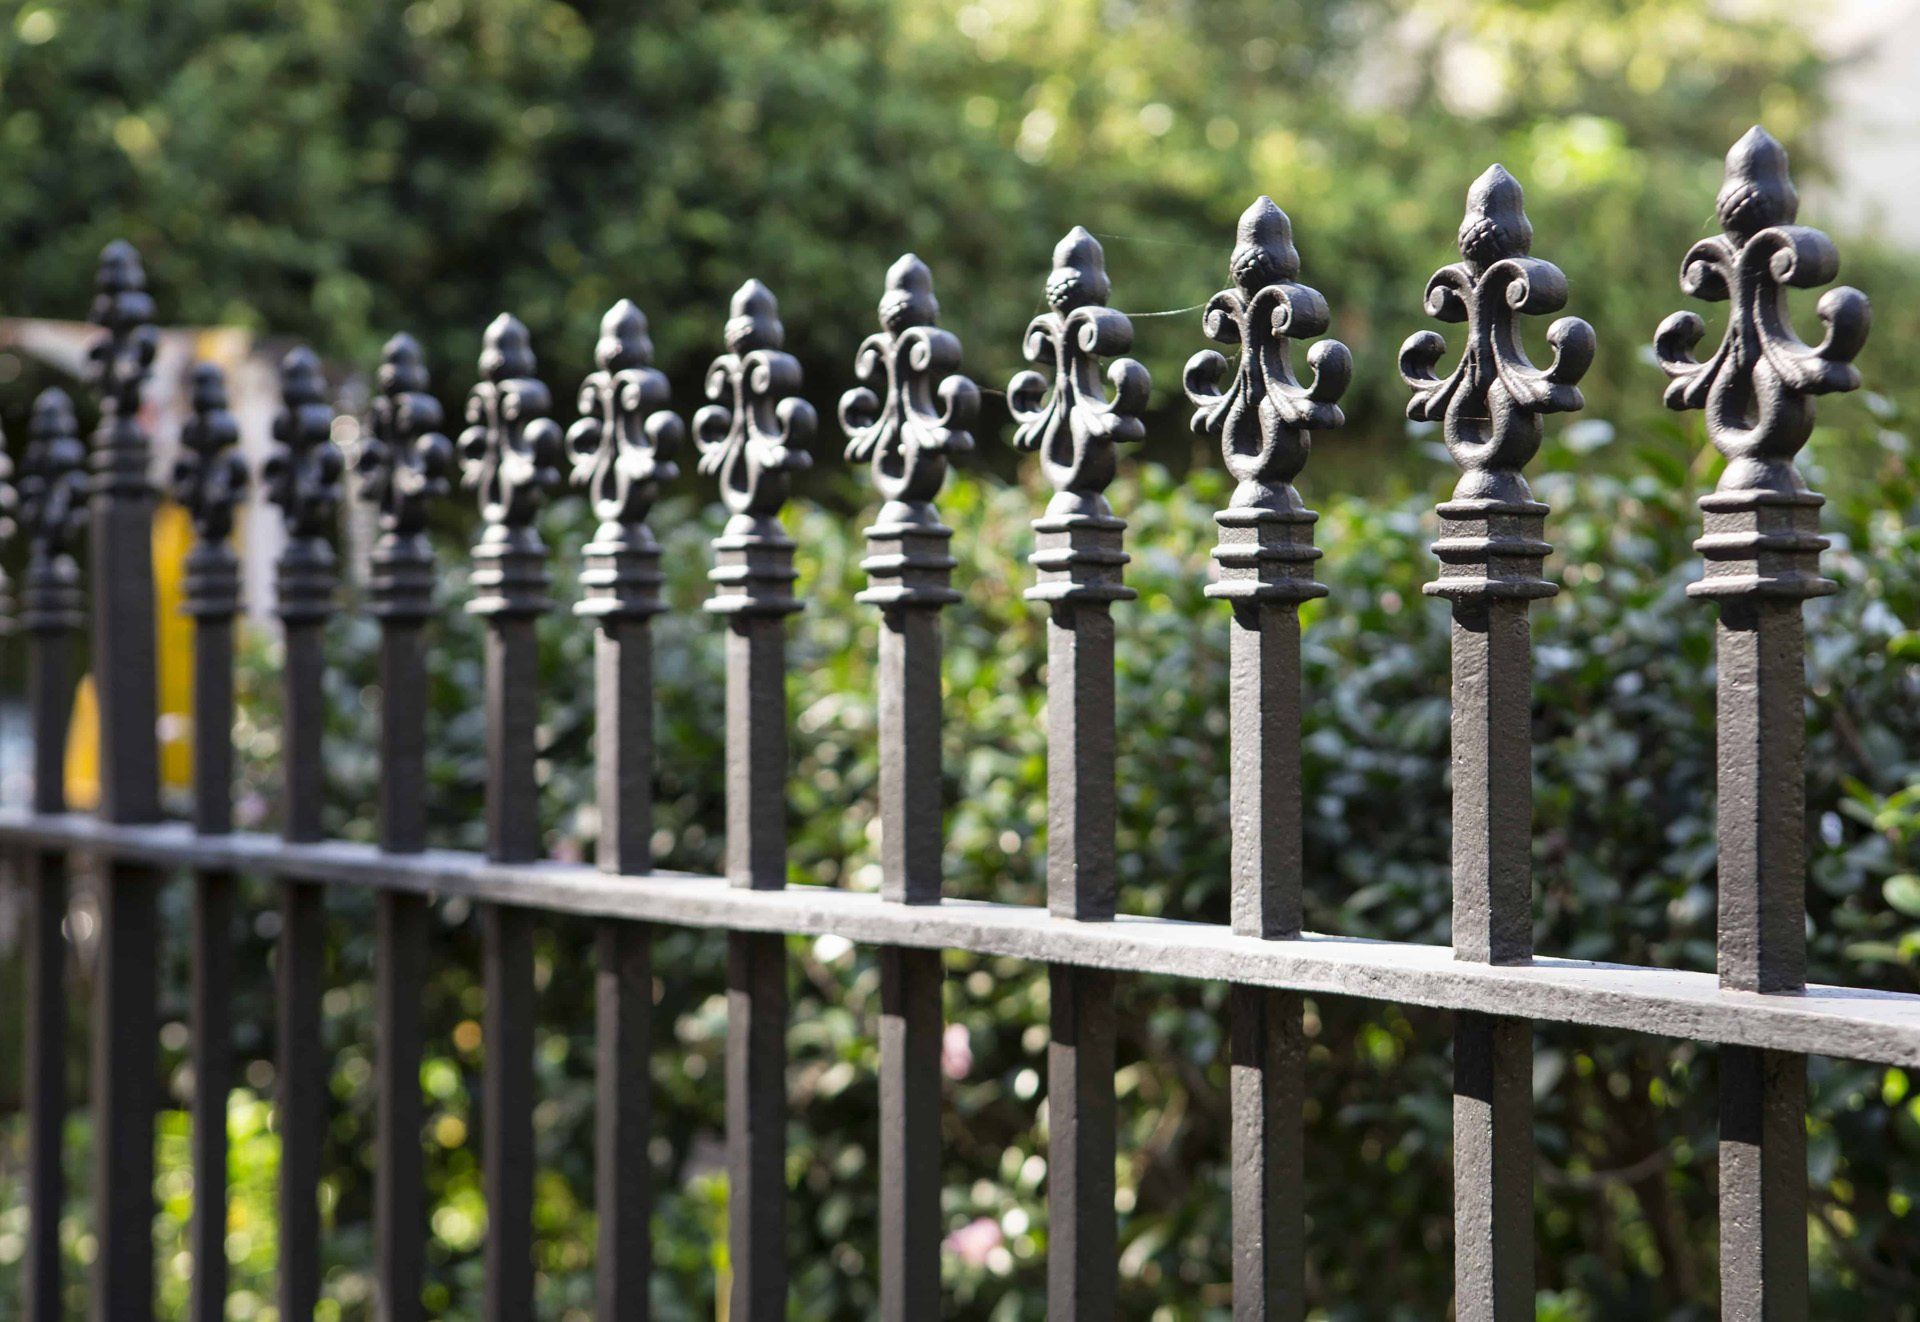 Wrought iron fence installation in CLeveland